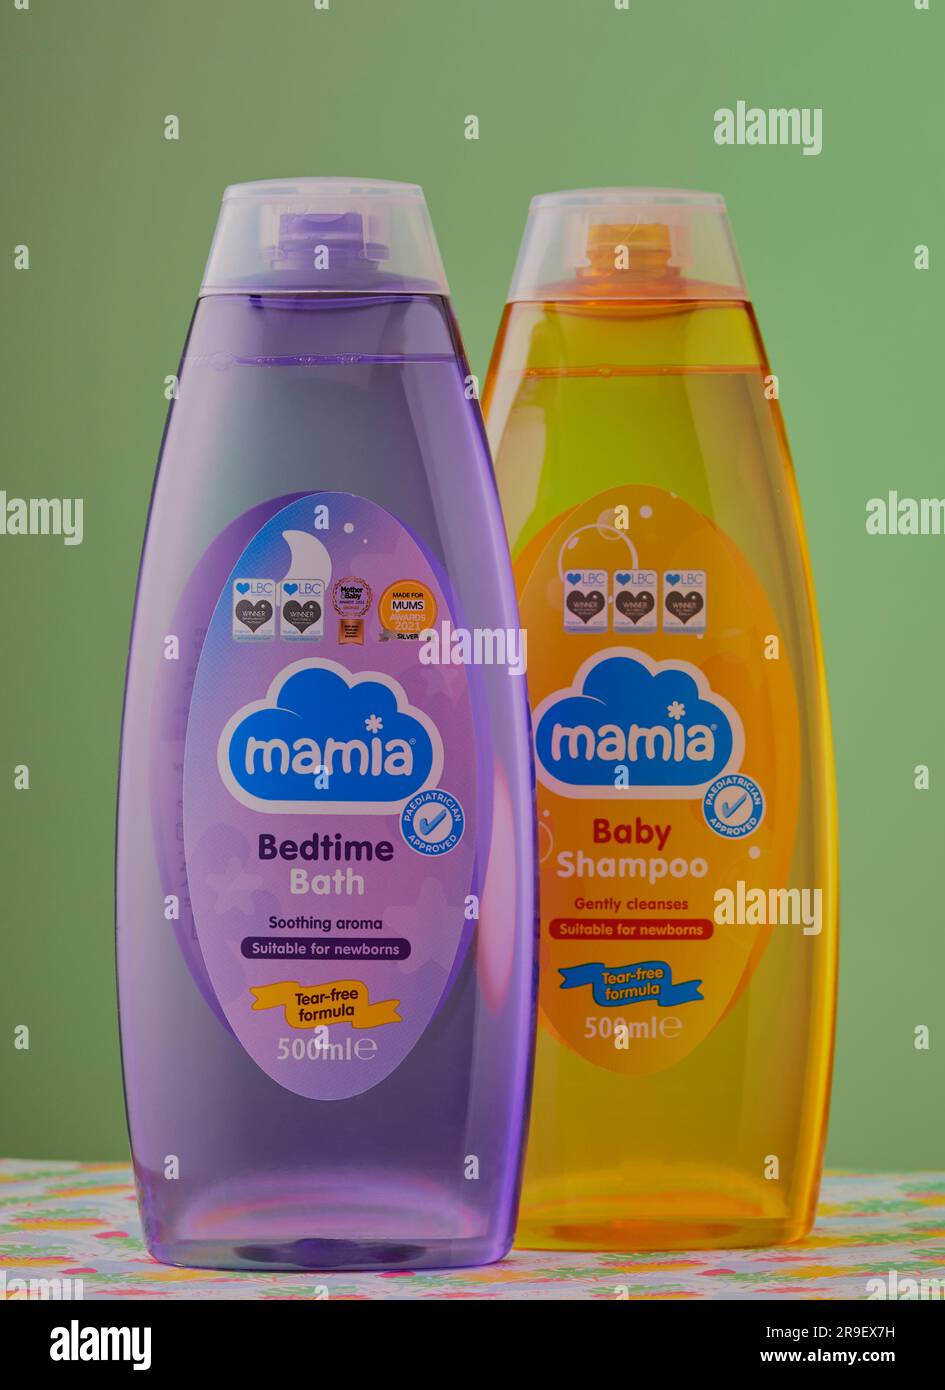 Mansfield,Nottingham,United Kingdom:Studio product image of Mamai baby products, Mamai is Aldis own brand of baby products. Stock Photo